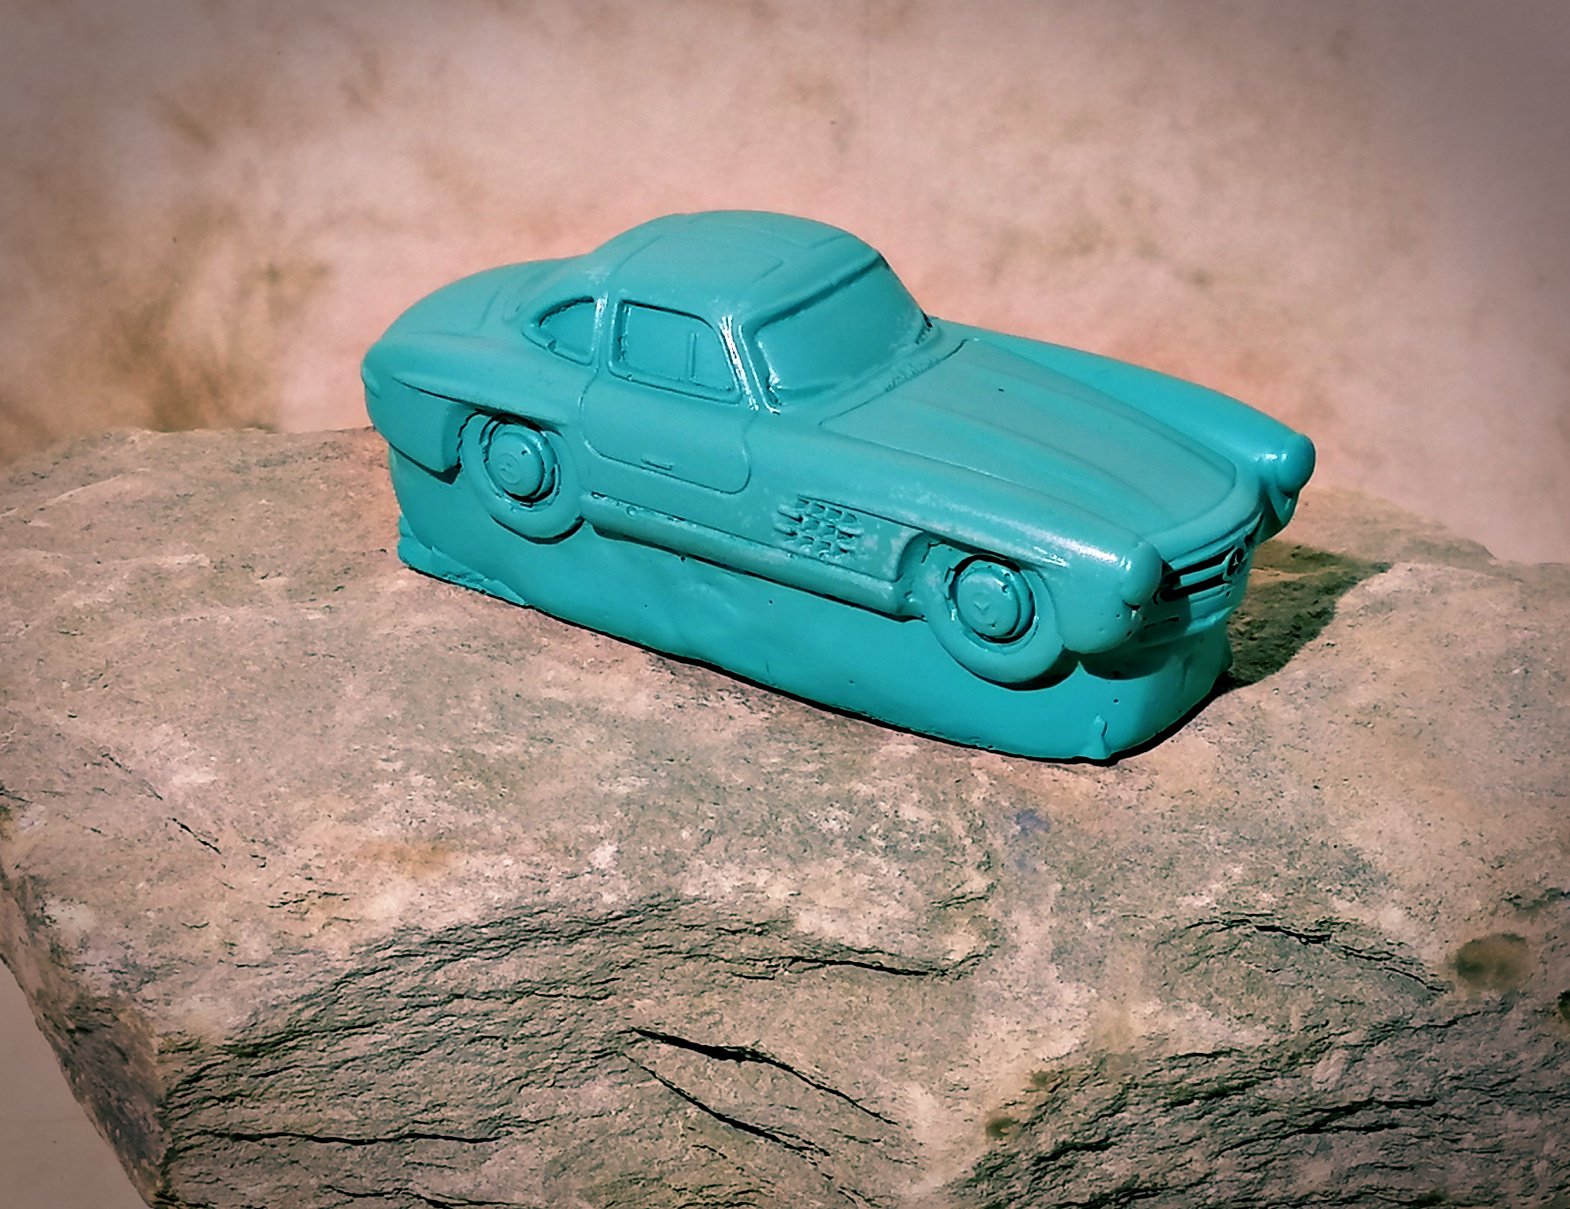 Roland Van Ast; Born Out Of Rock Mercedes 3, 2020, Original Ceramics Handbuilt, 4 x 1.6 inches. Artwork description: 241 Born out of Rock by Mad MouseMercedes 300 SL- Handmade modelcars- Born out of Rock series- 1 of only 50- Scale 143- 10 cm 150 gr- Handmade mold- Cast porcelain plaster- Sculpted model- Hand painted- Protective layer- Showcase box- Small series, special colors and models on ...